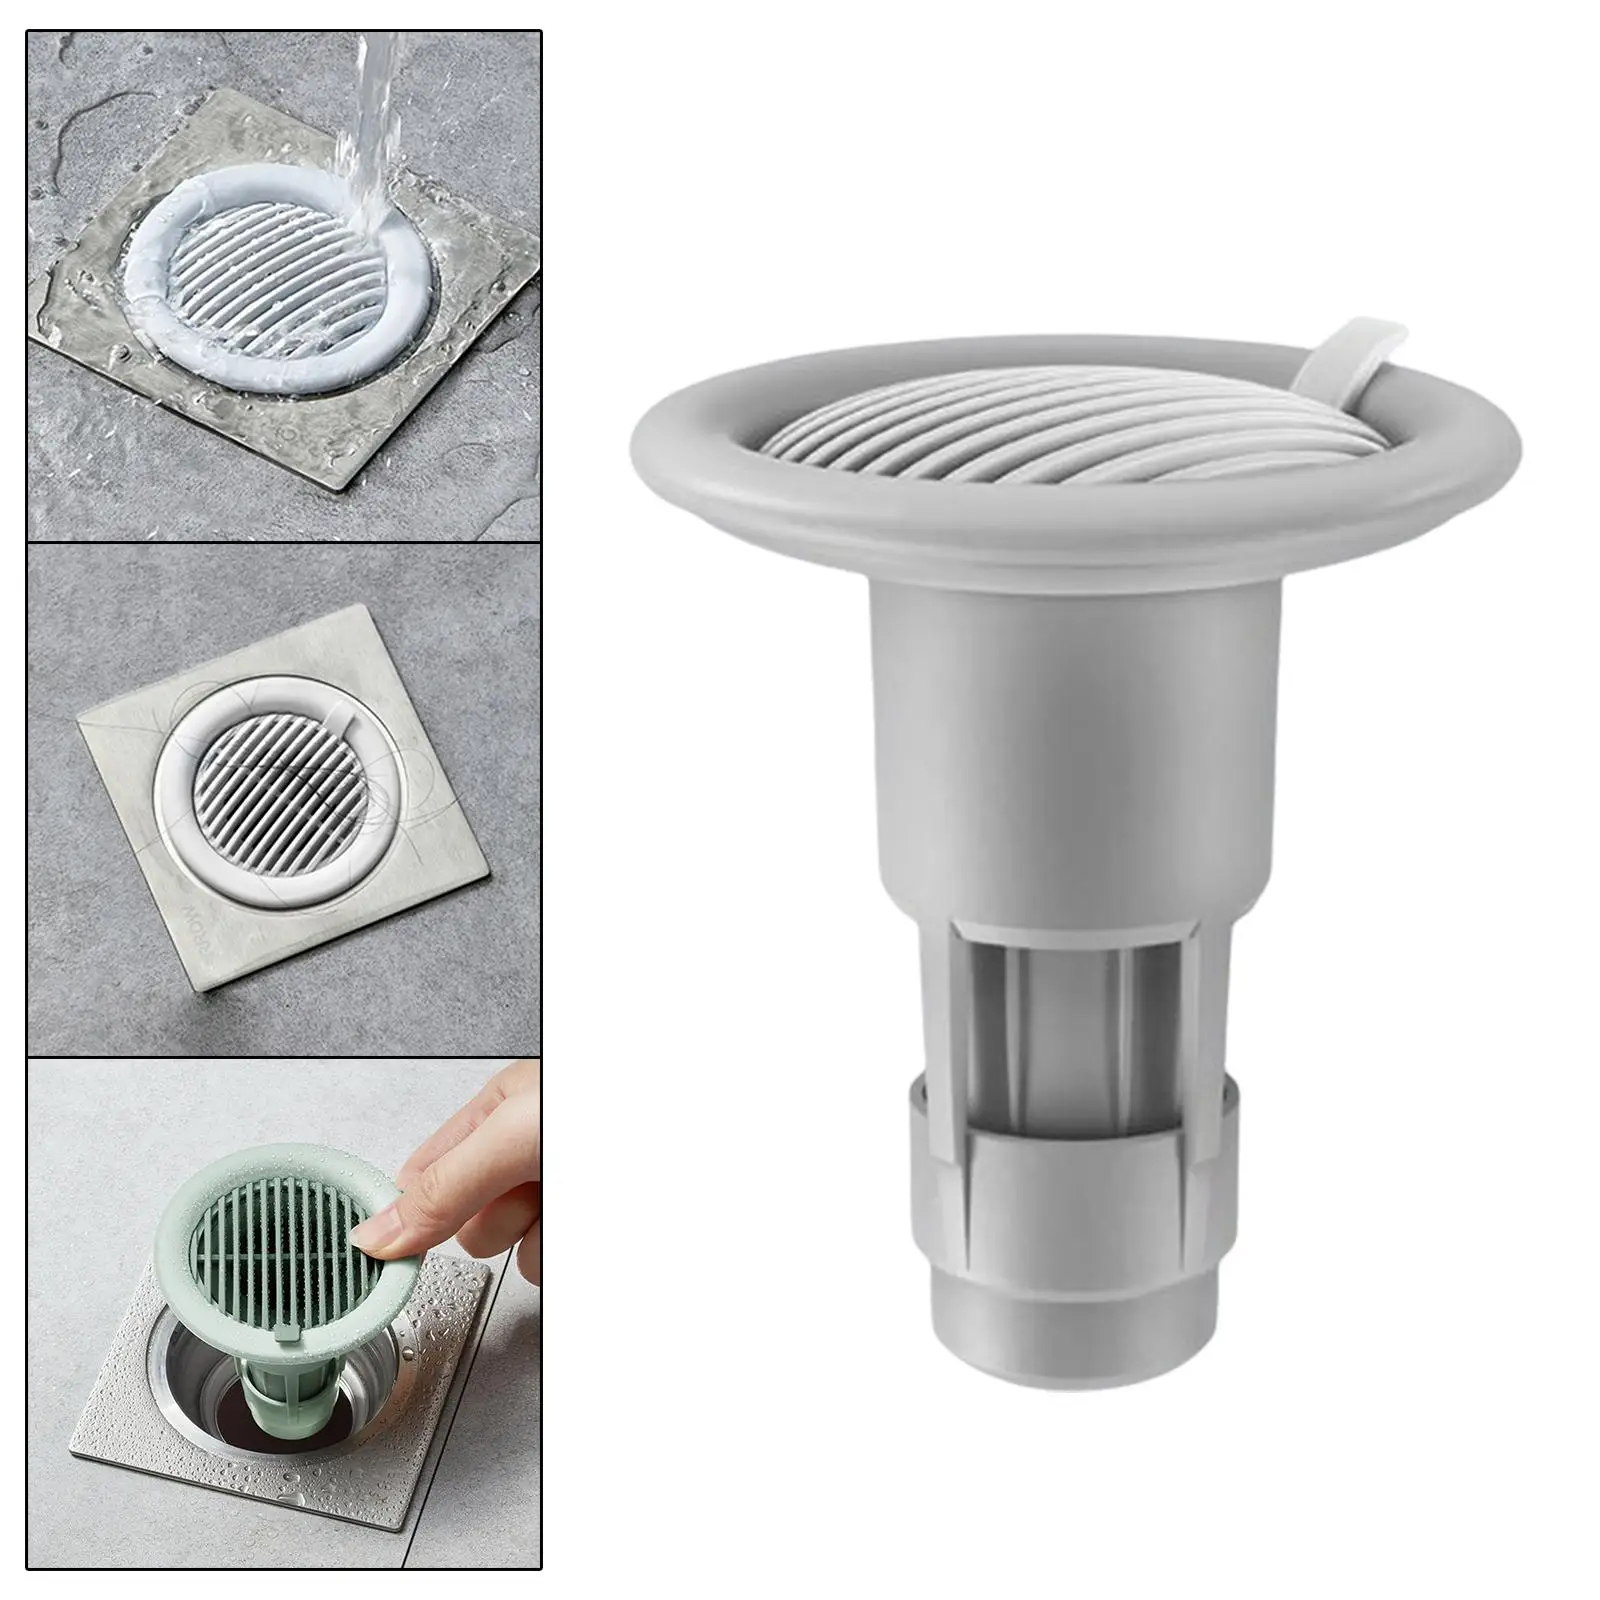 5xShower Floor Drain Sewer Core Drainage Insert Stoppers for Bathroom Kitchen